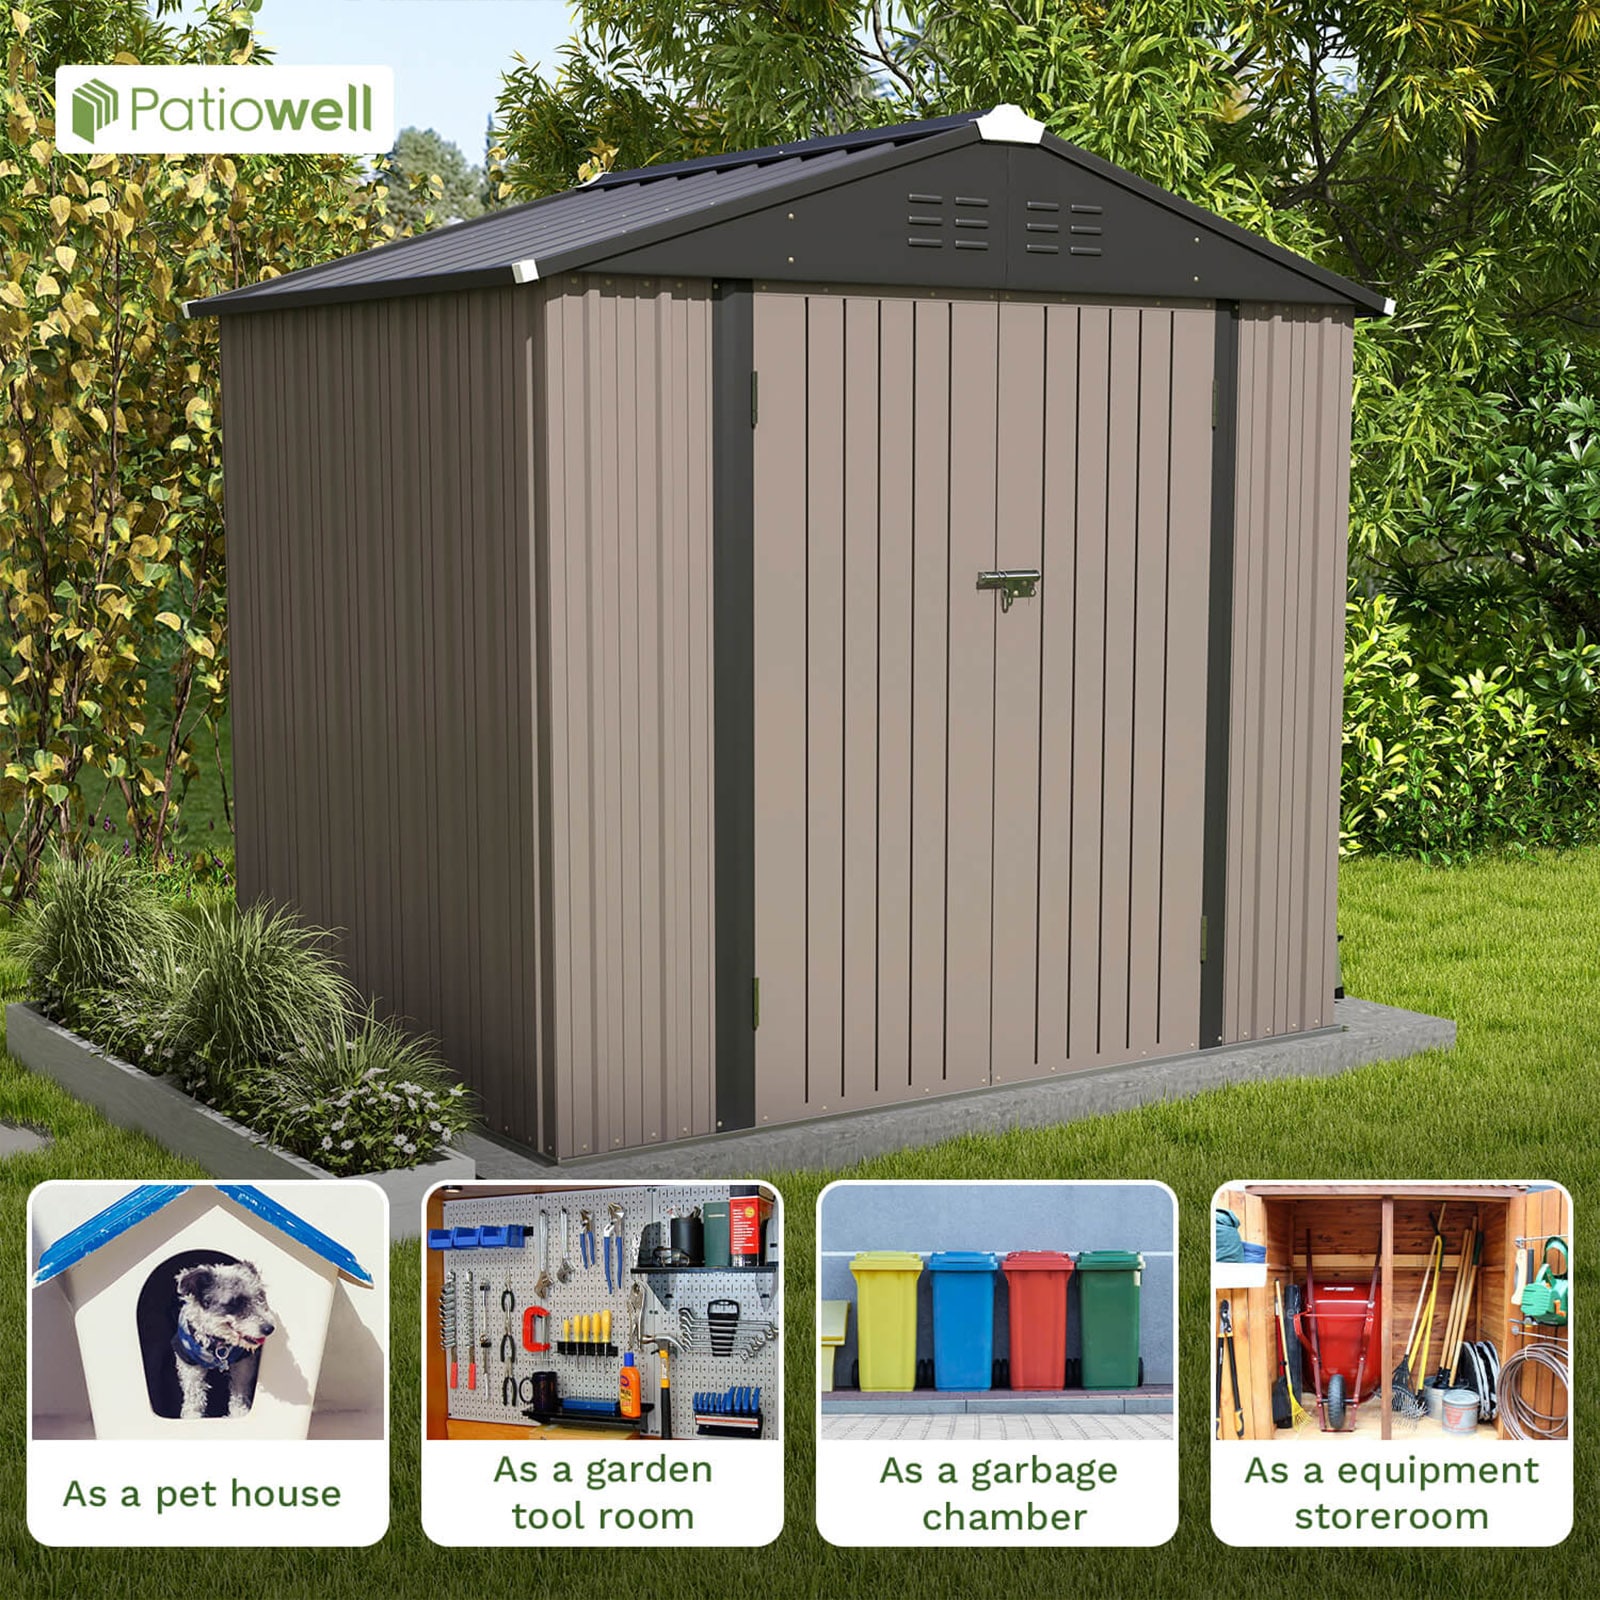 Vongrasig 6 x 4 x 6 FT Outdoor Storage Shed Clearance with Lockable Door  Metal Garden Shed Steel Anti-Corrosion Storage House Waterproof Tool Shed  for